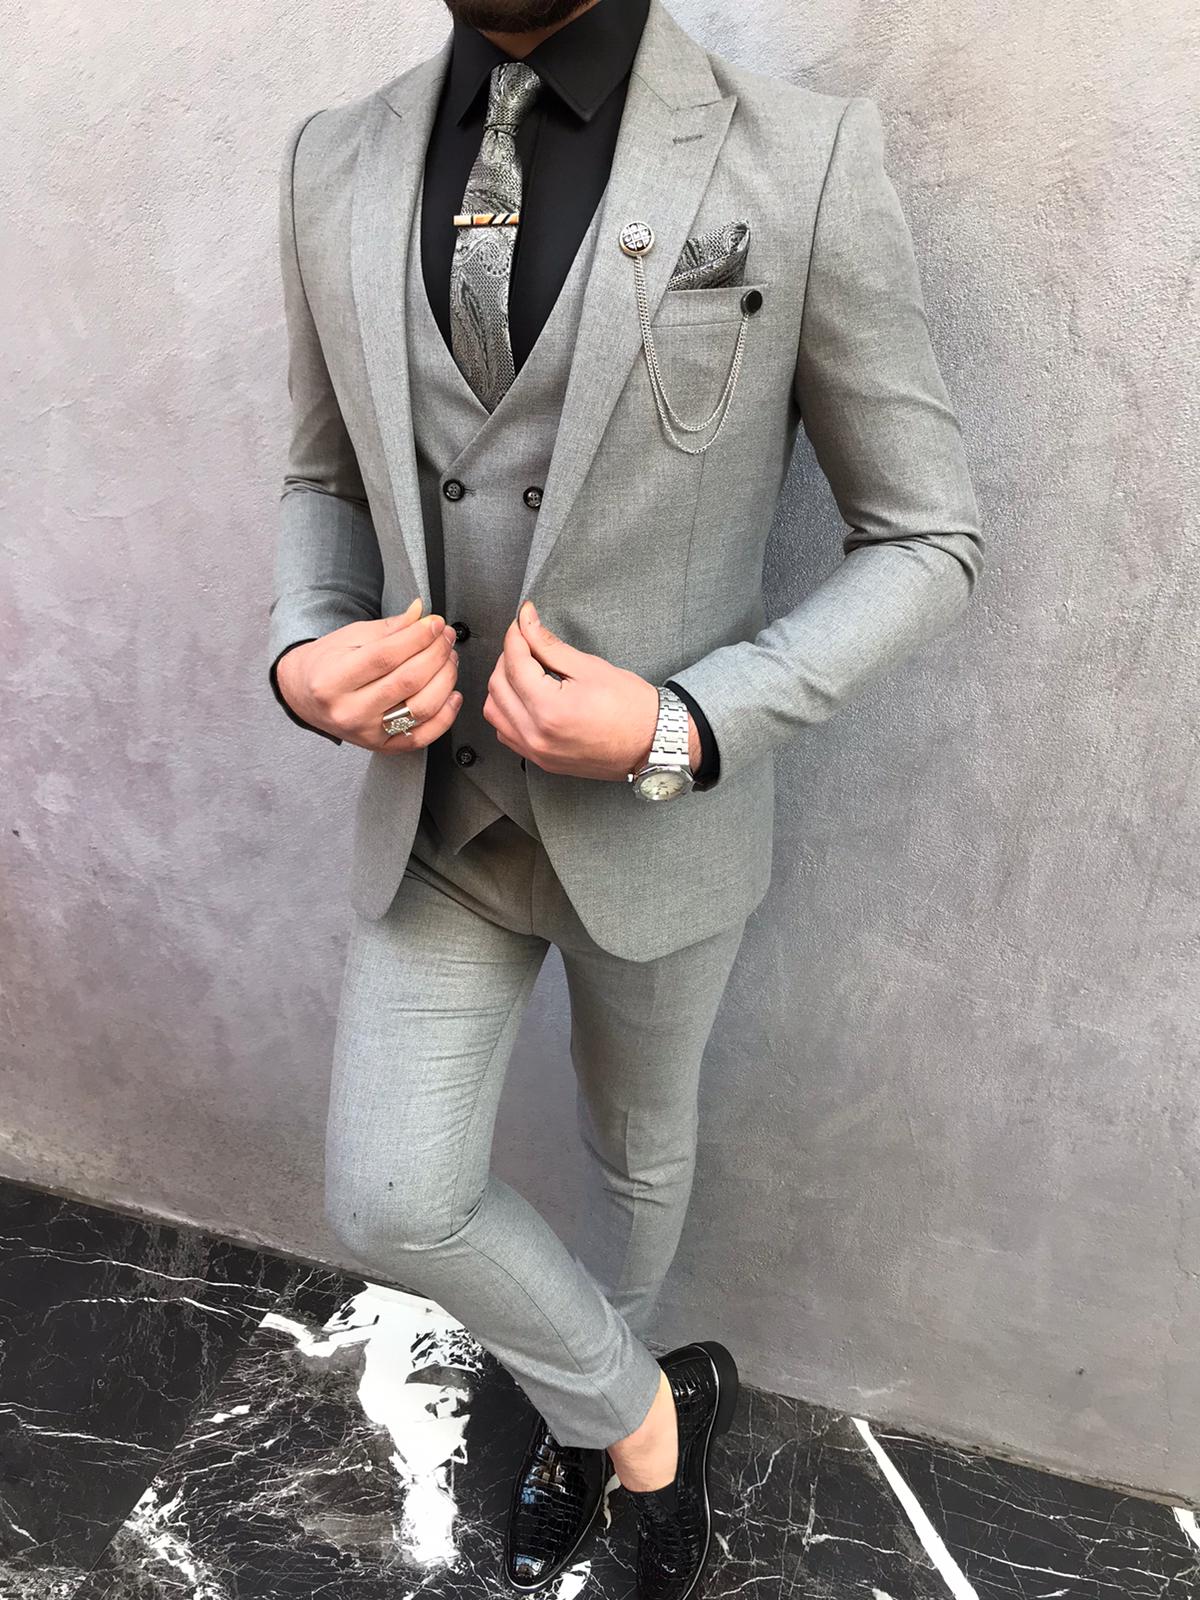 Buy Gray Slim Fit Suit by BespokeDailyShop.com | Worldwide Shipping